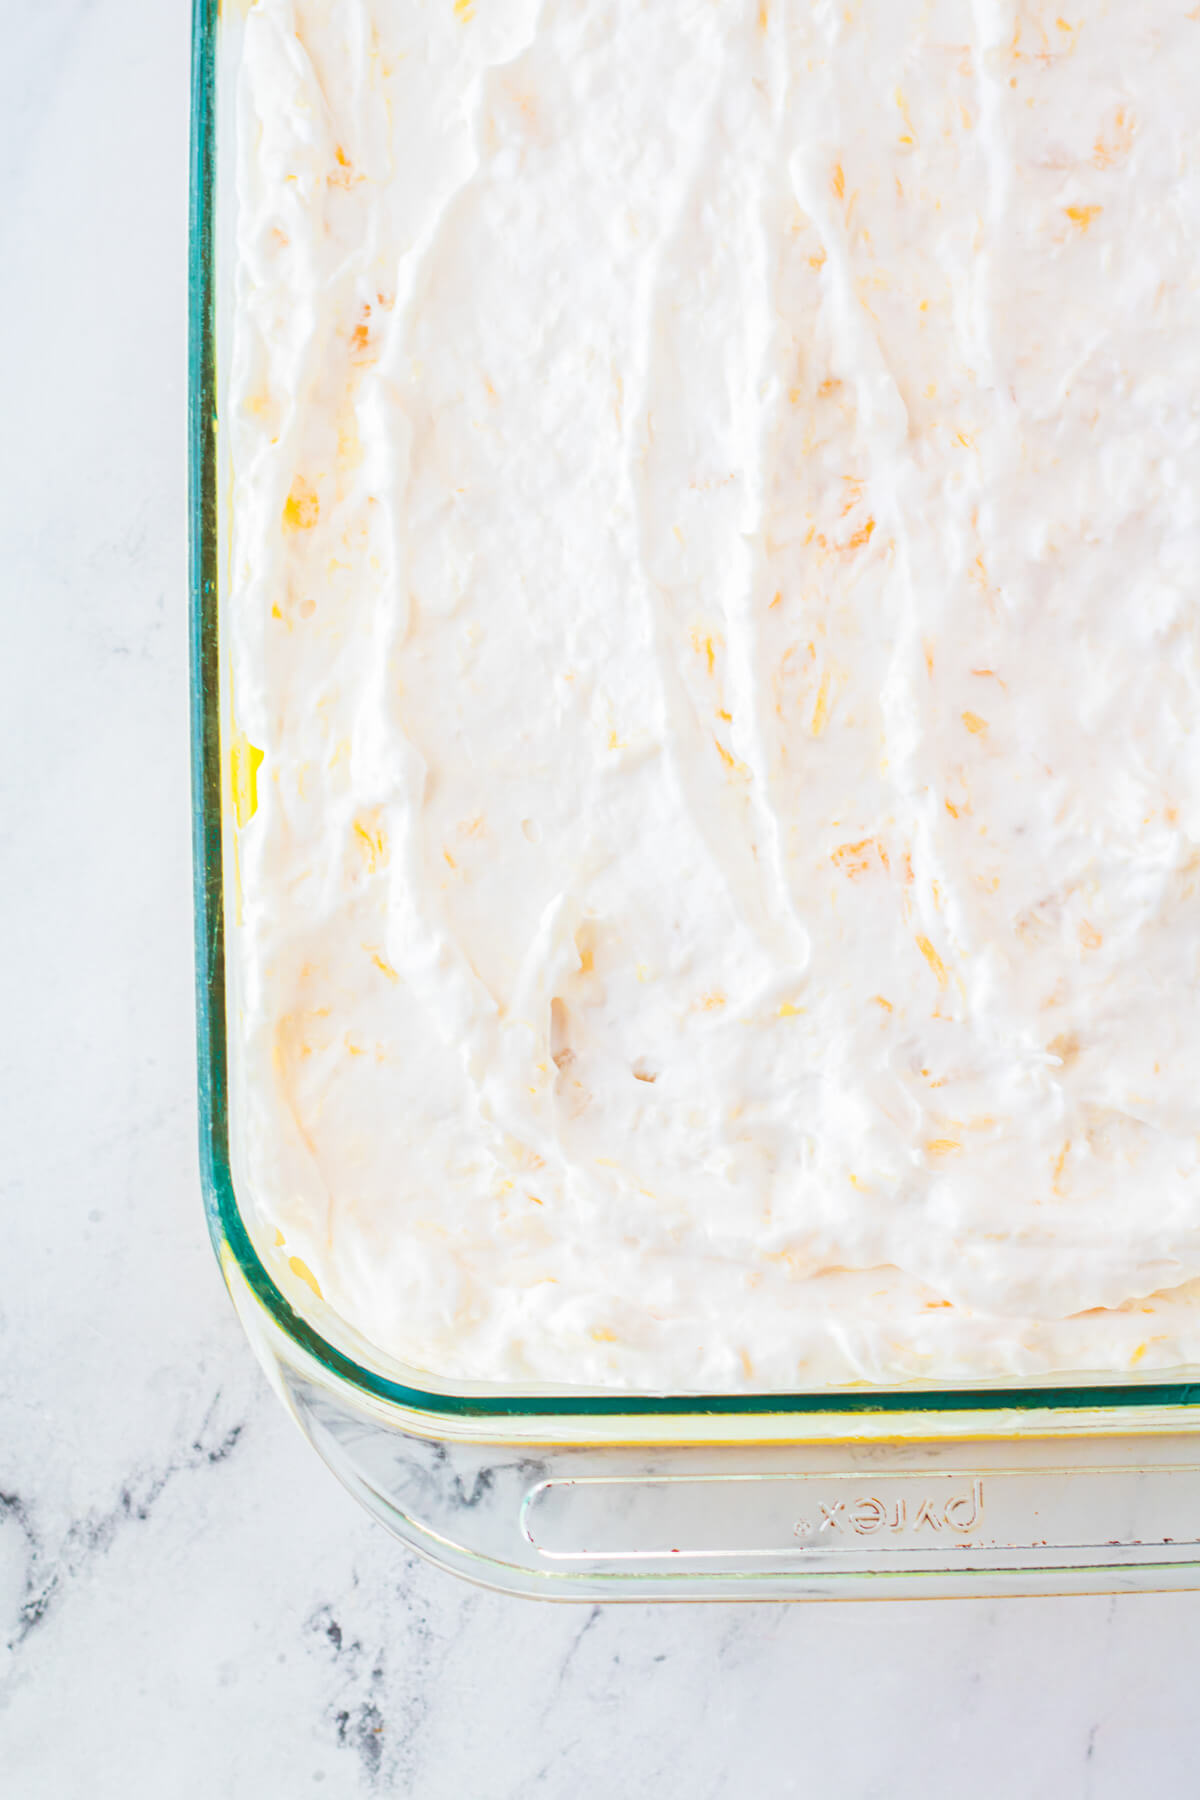 A glass baking dish of dreamy Pineapple Poke Cake with creamy whipped topping.